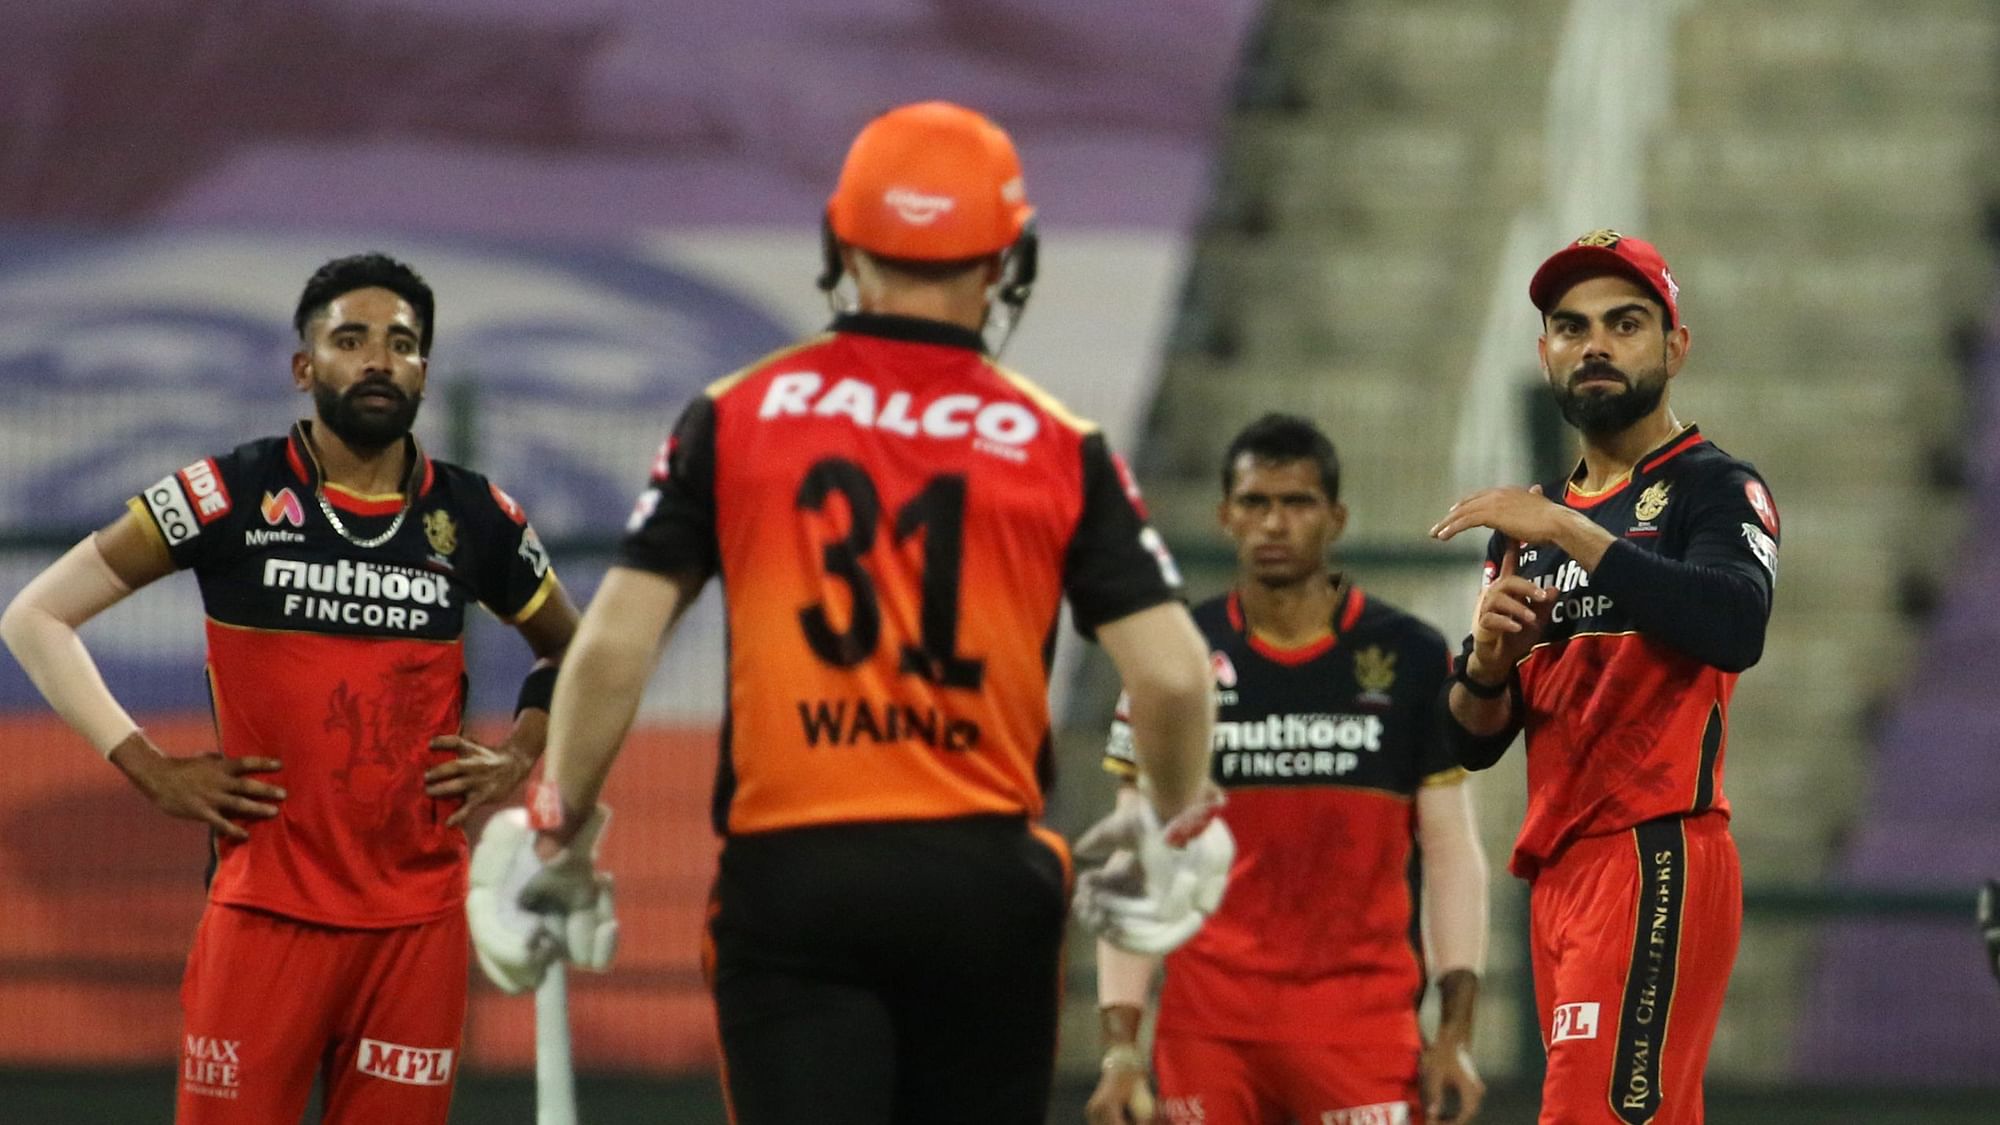 David Warner’s dismissal on review during the match against Royal Challengers Bangalore (RCB) stoked controversy.